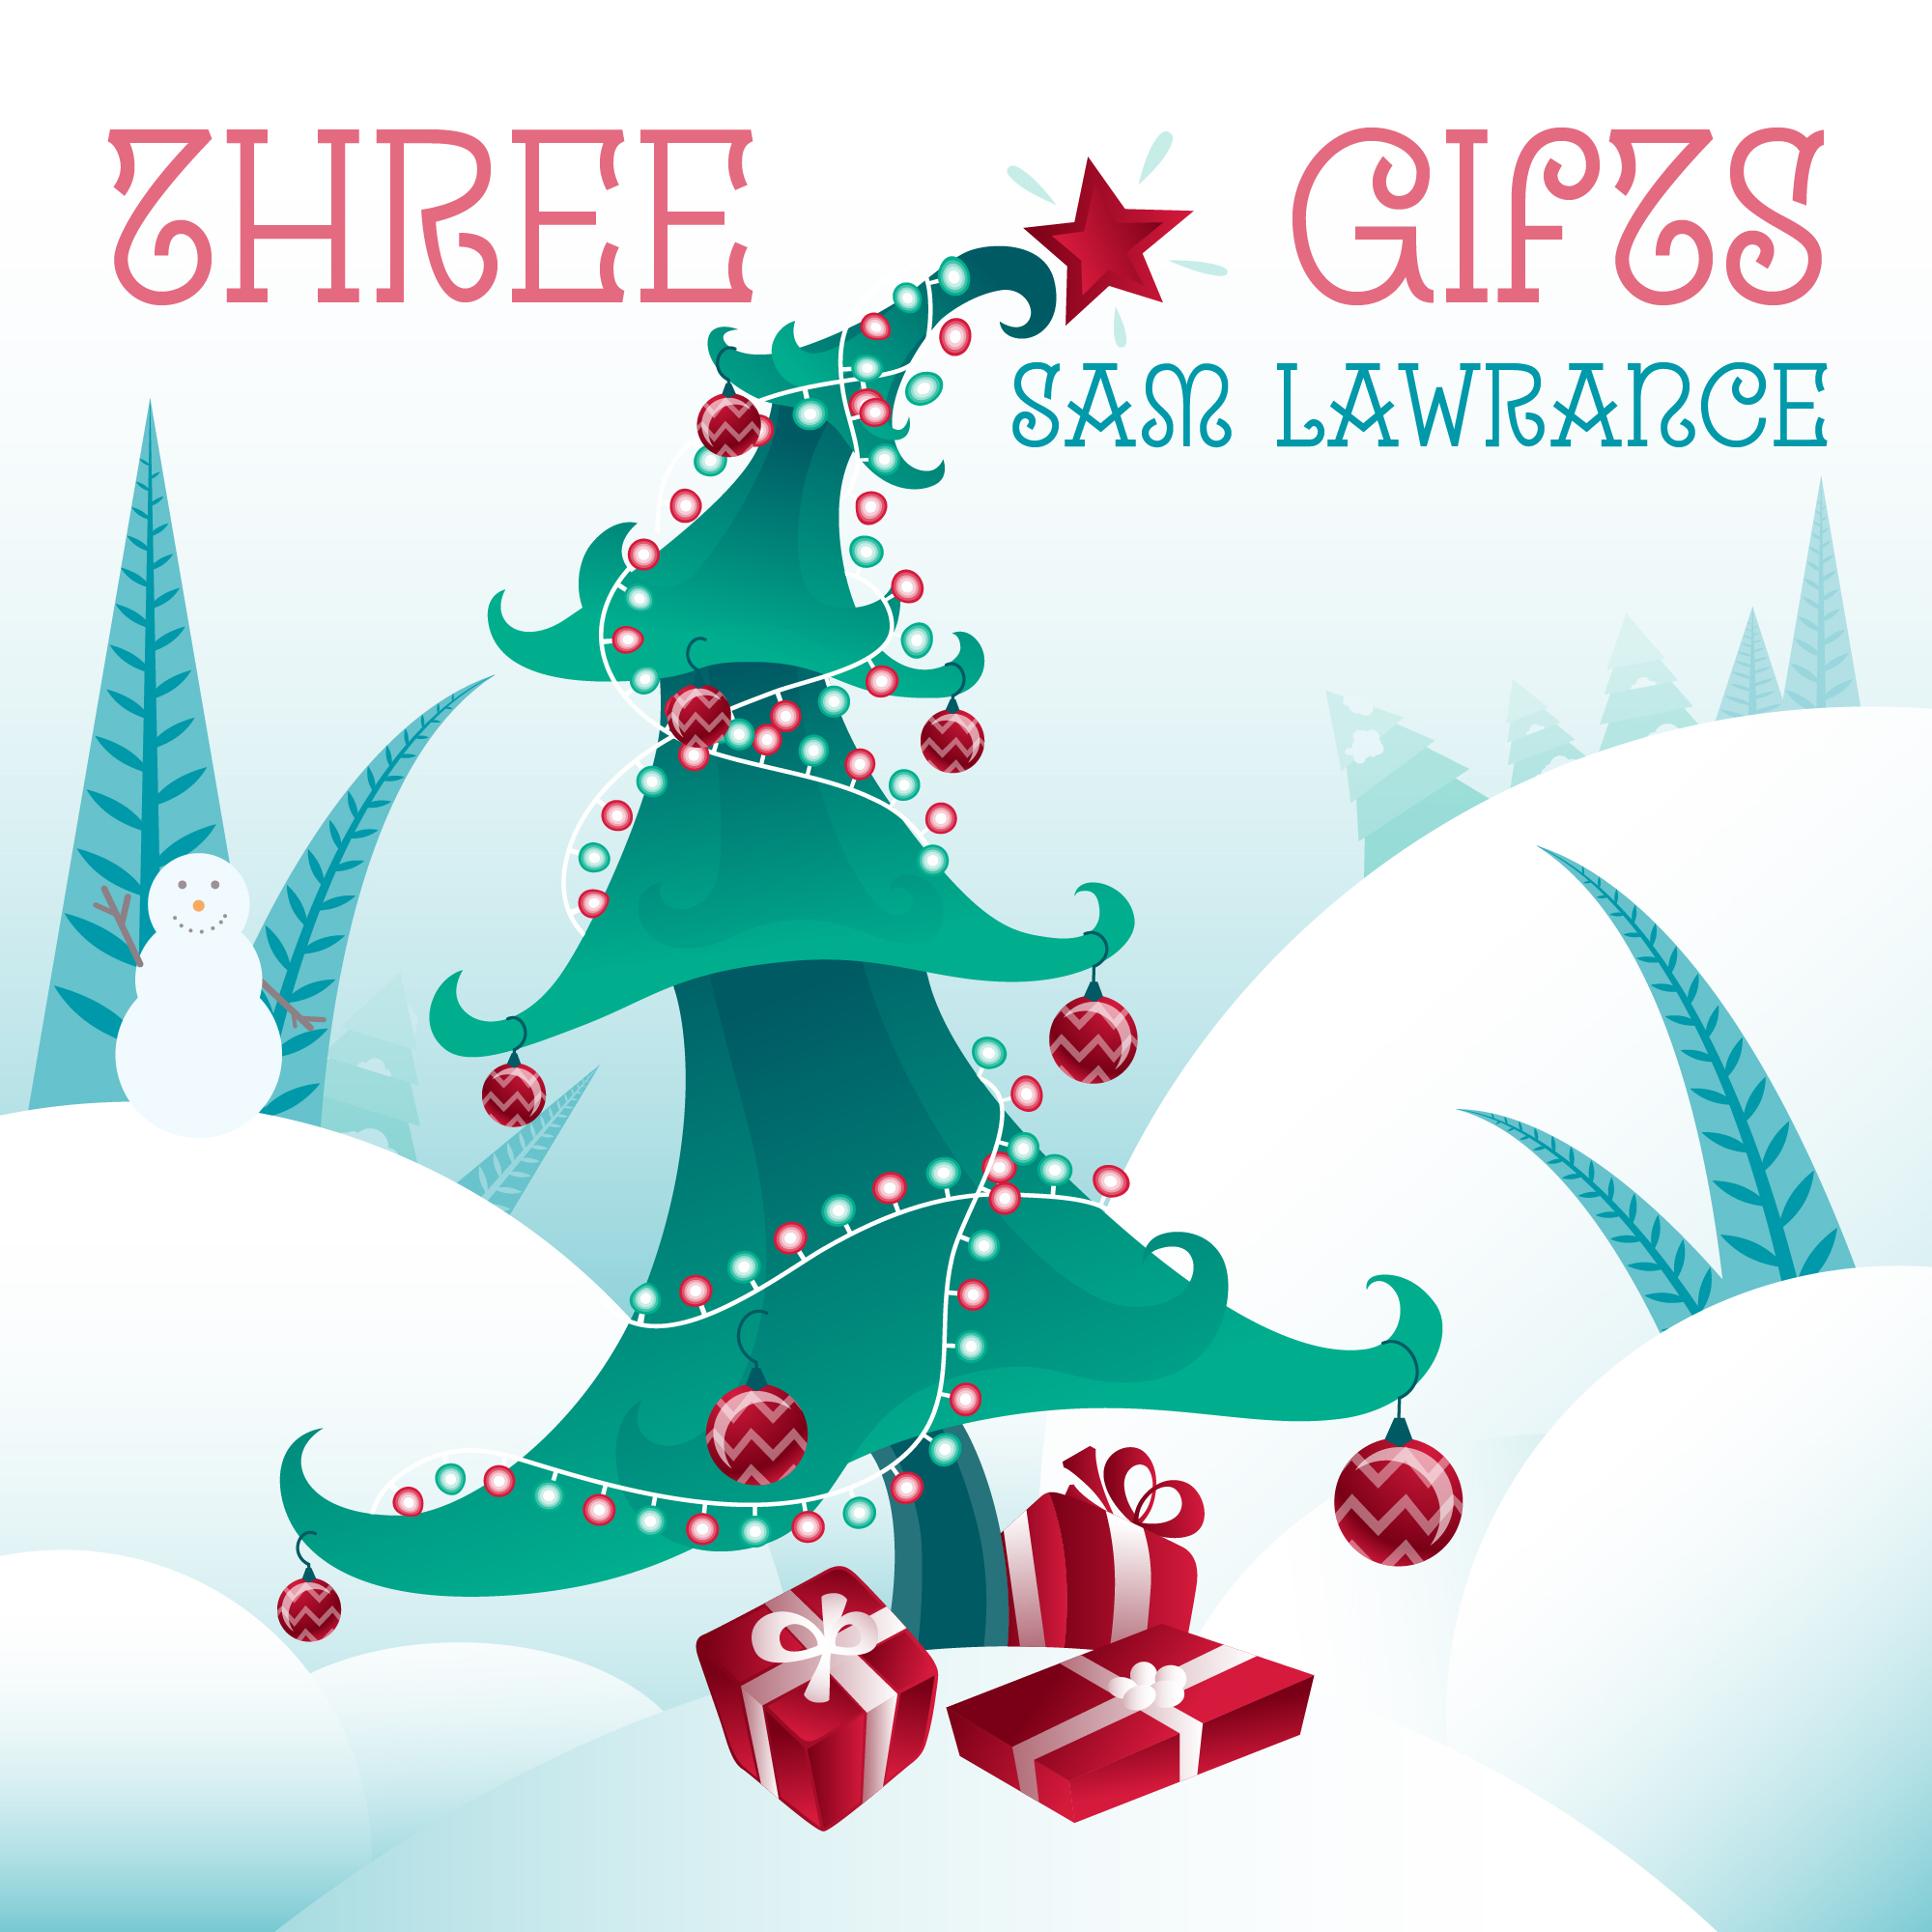 3 gifts by Sam Lawrance - song cover by Andrei Verner